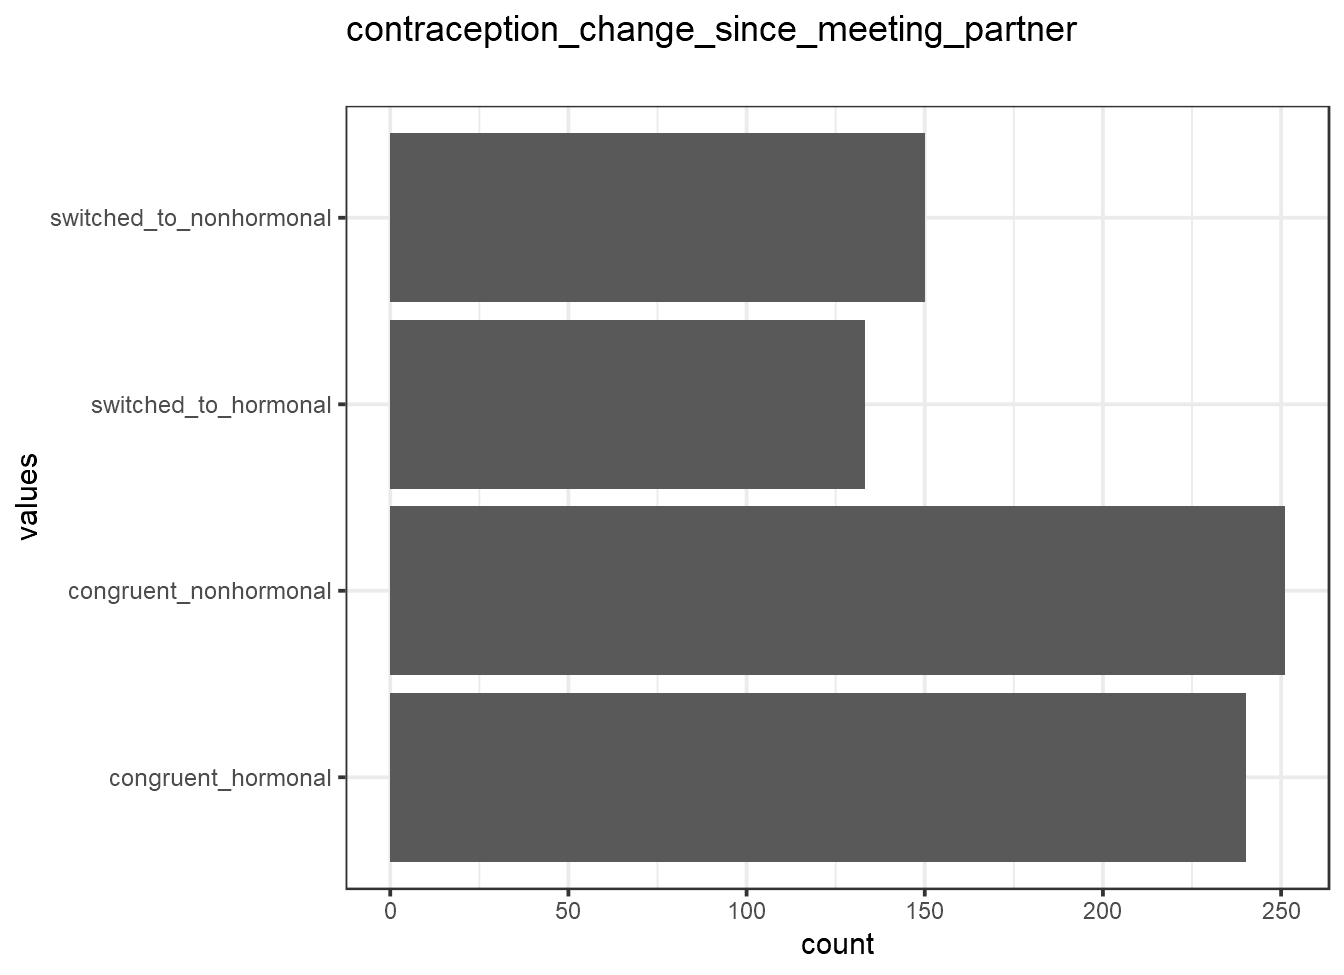 Distribution of values for contraception_change_since_meeting_partner